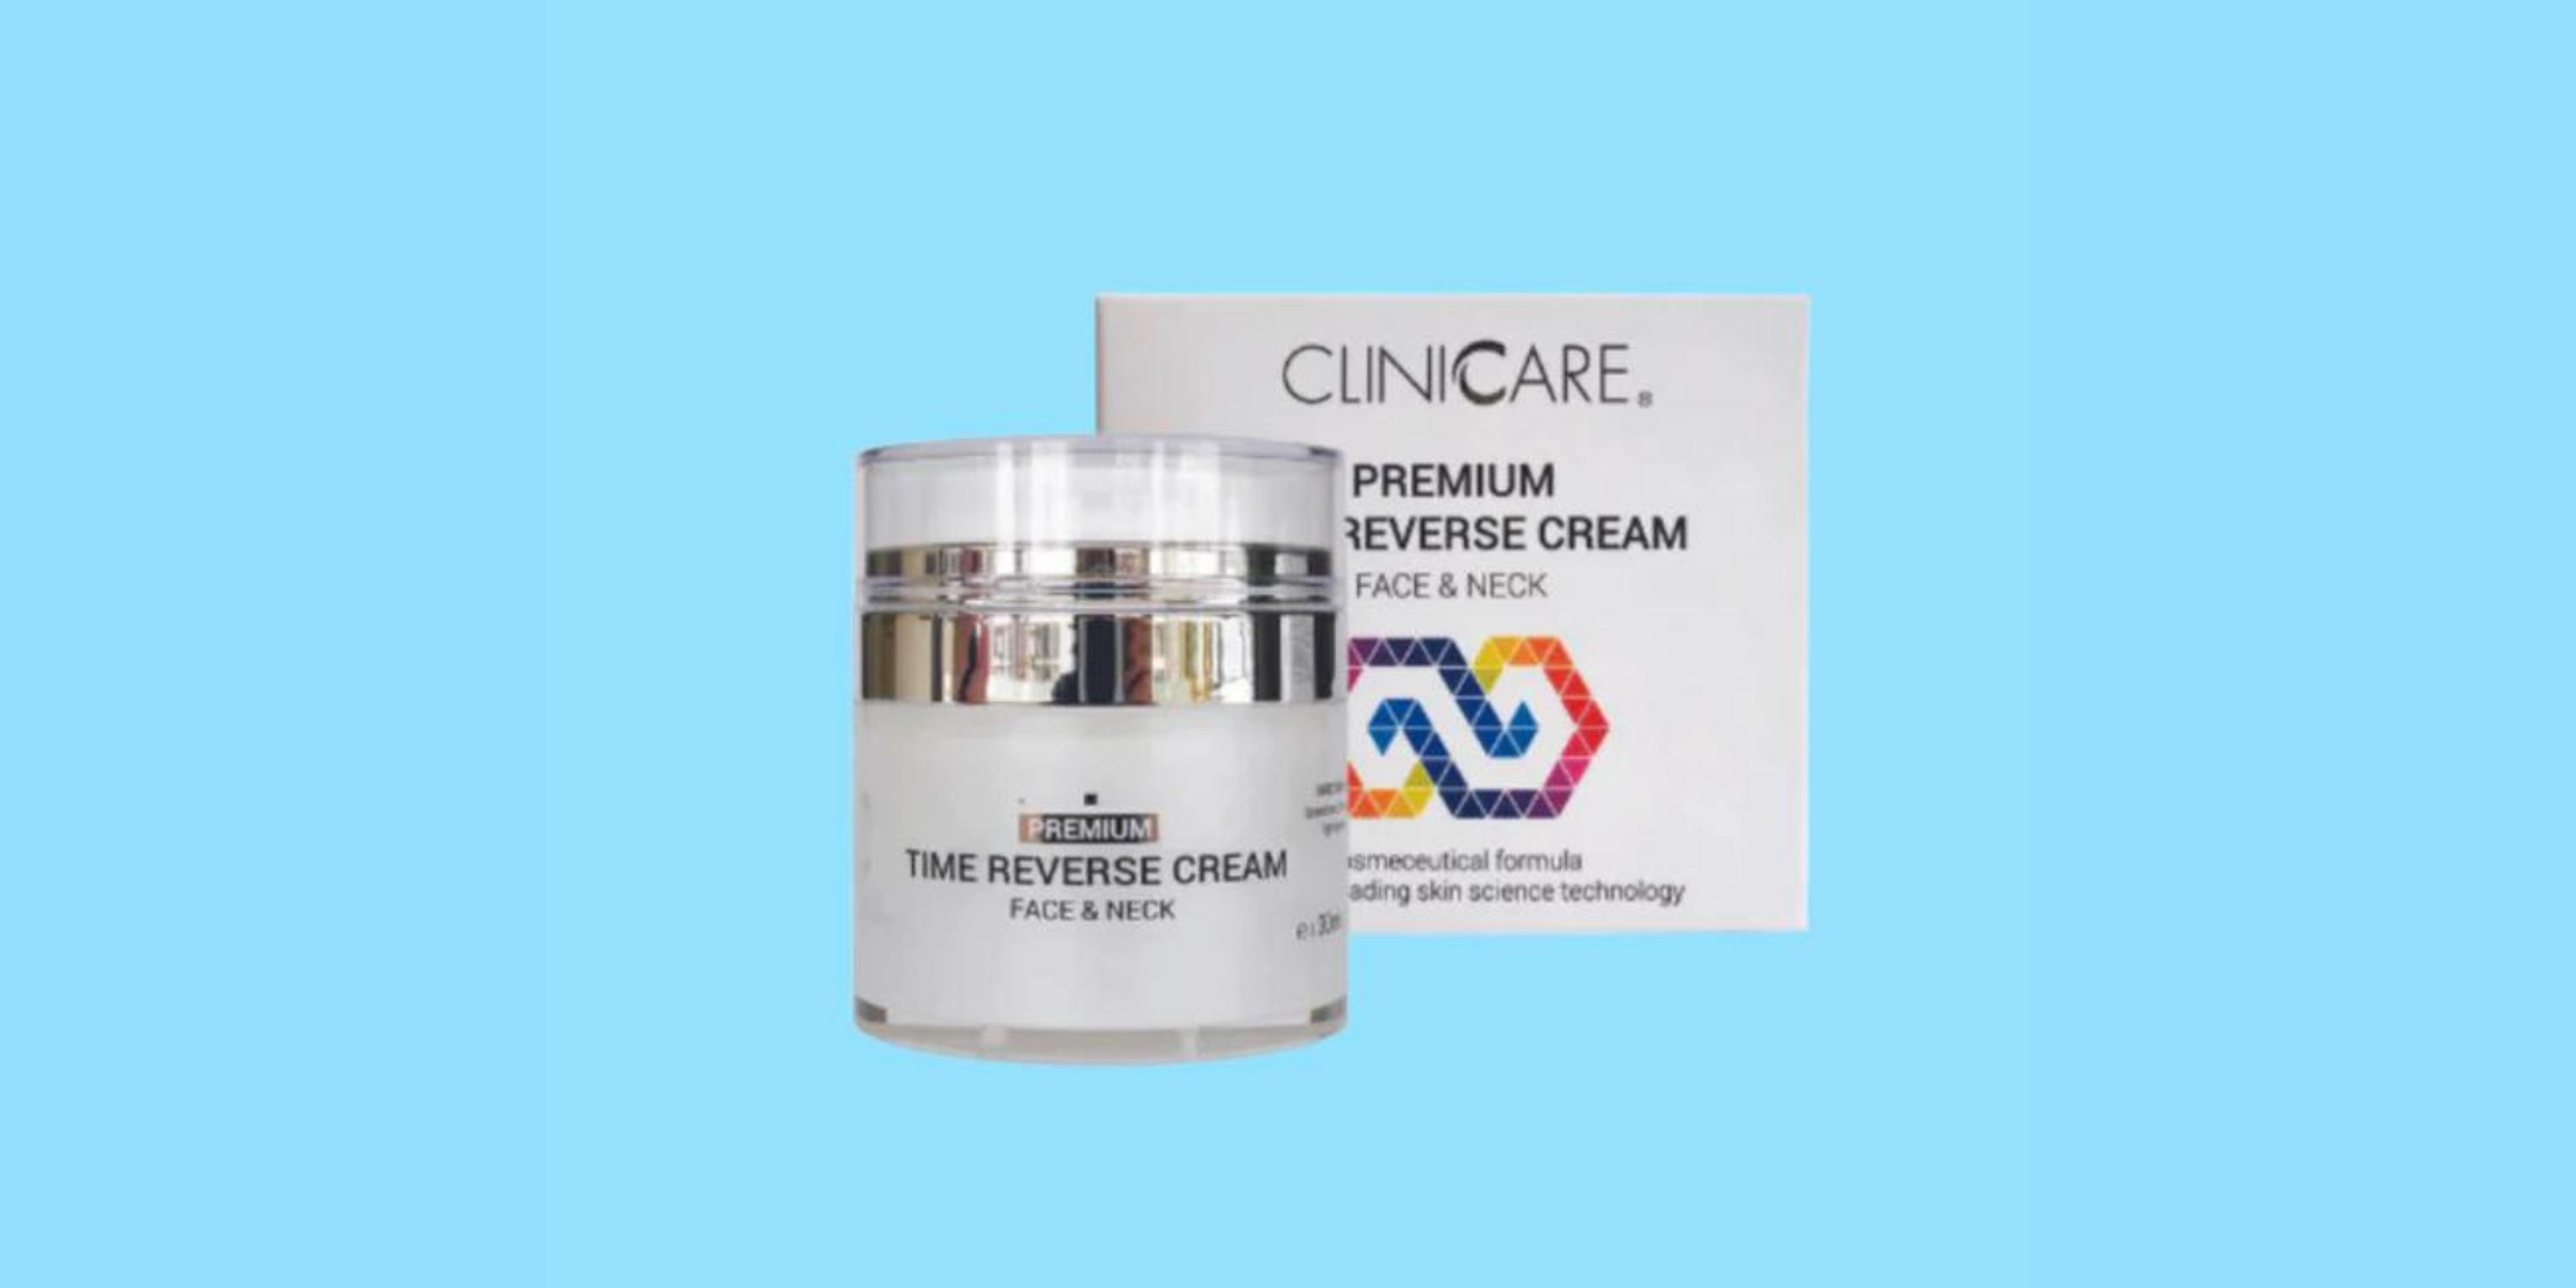 The Pros and Cons of the CLINICCARE Premium Time Reverse Cream (Face and Neck) 30ml